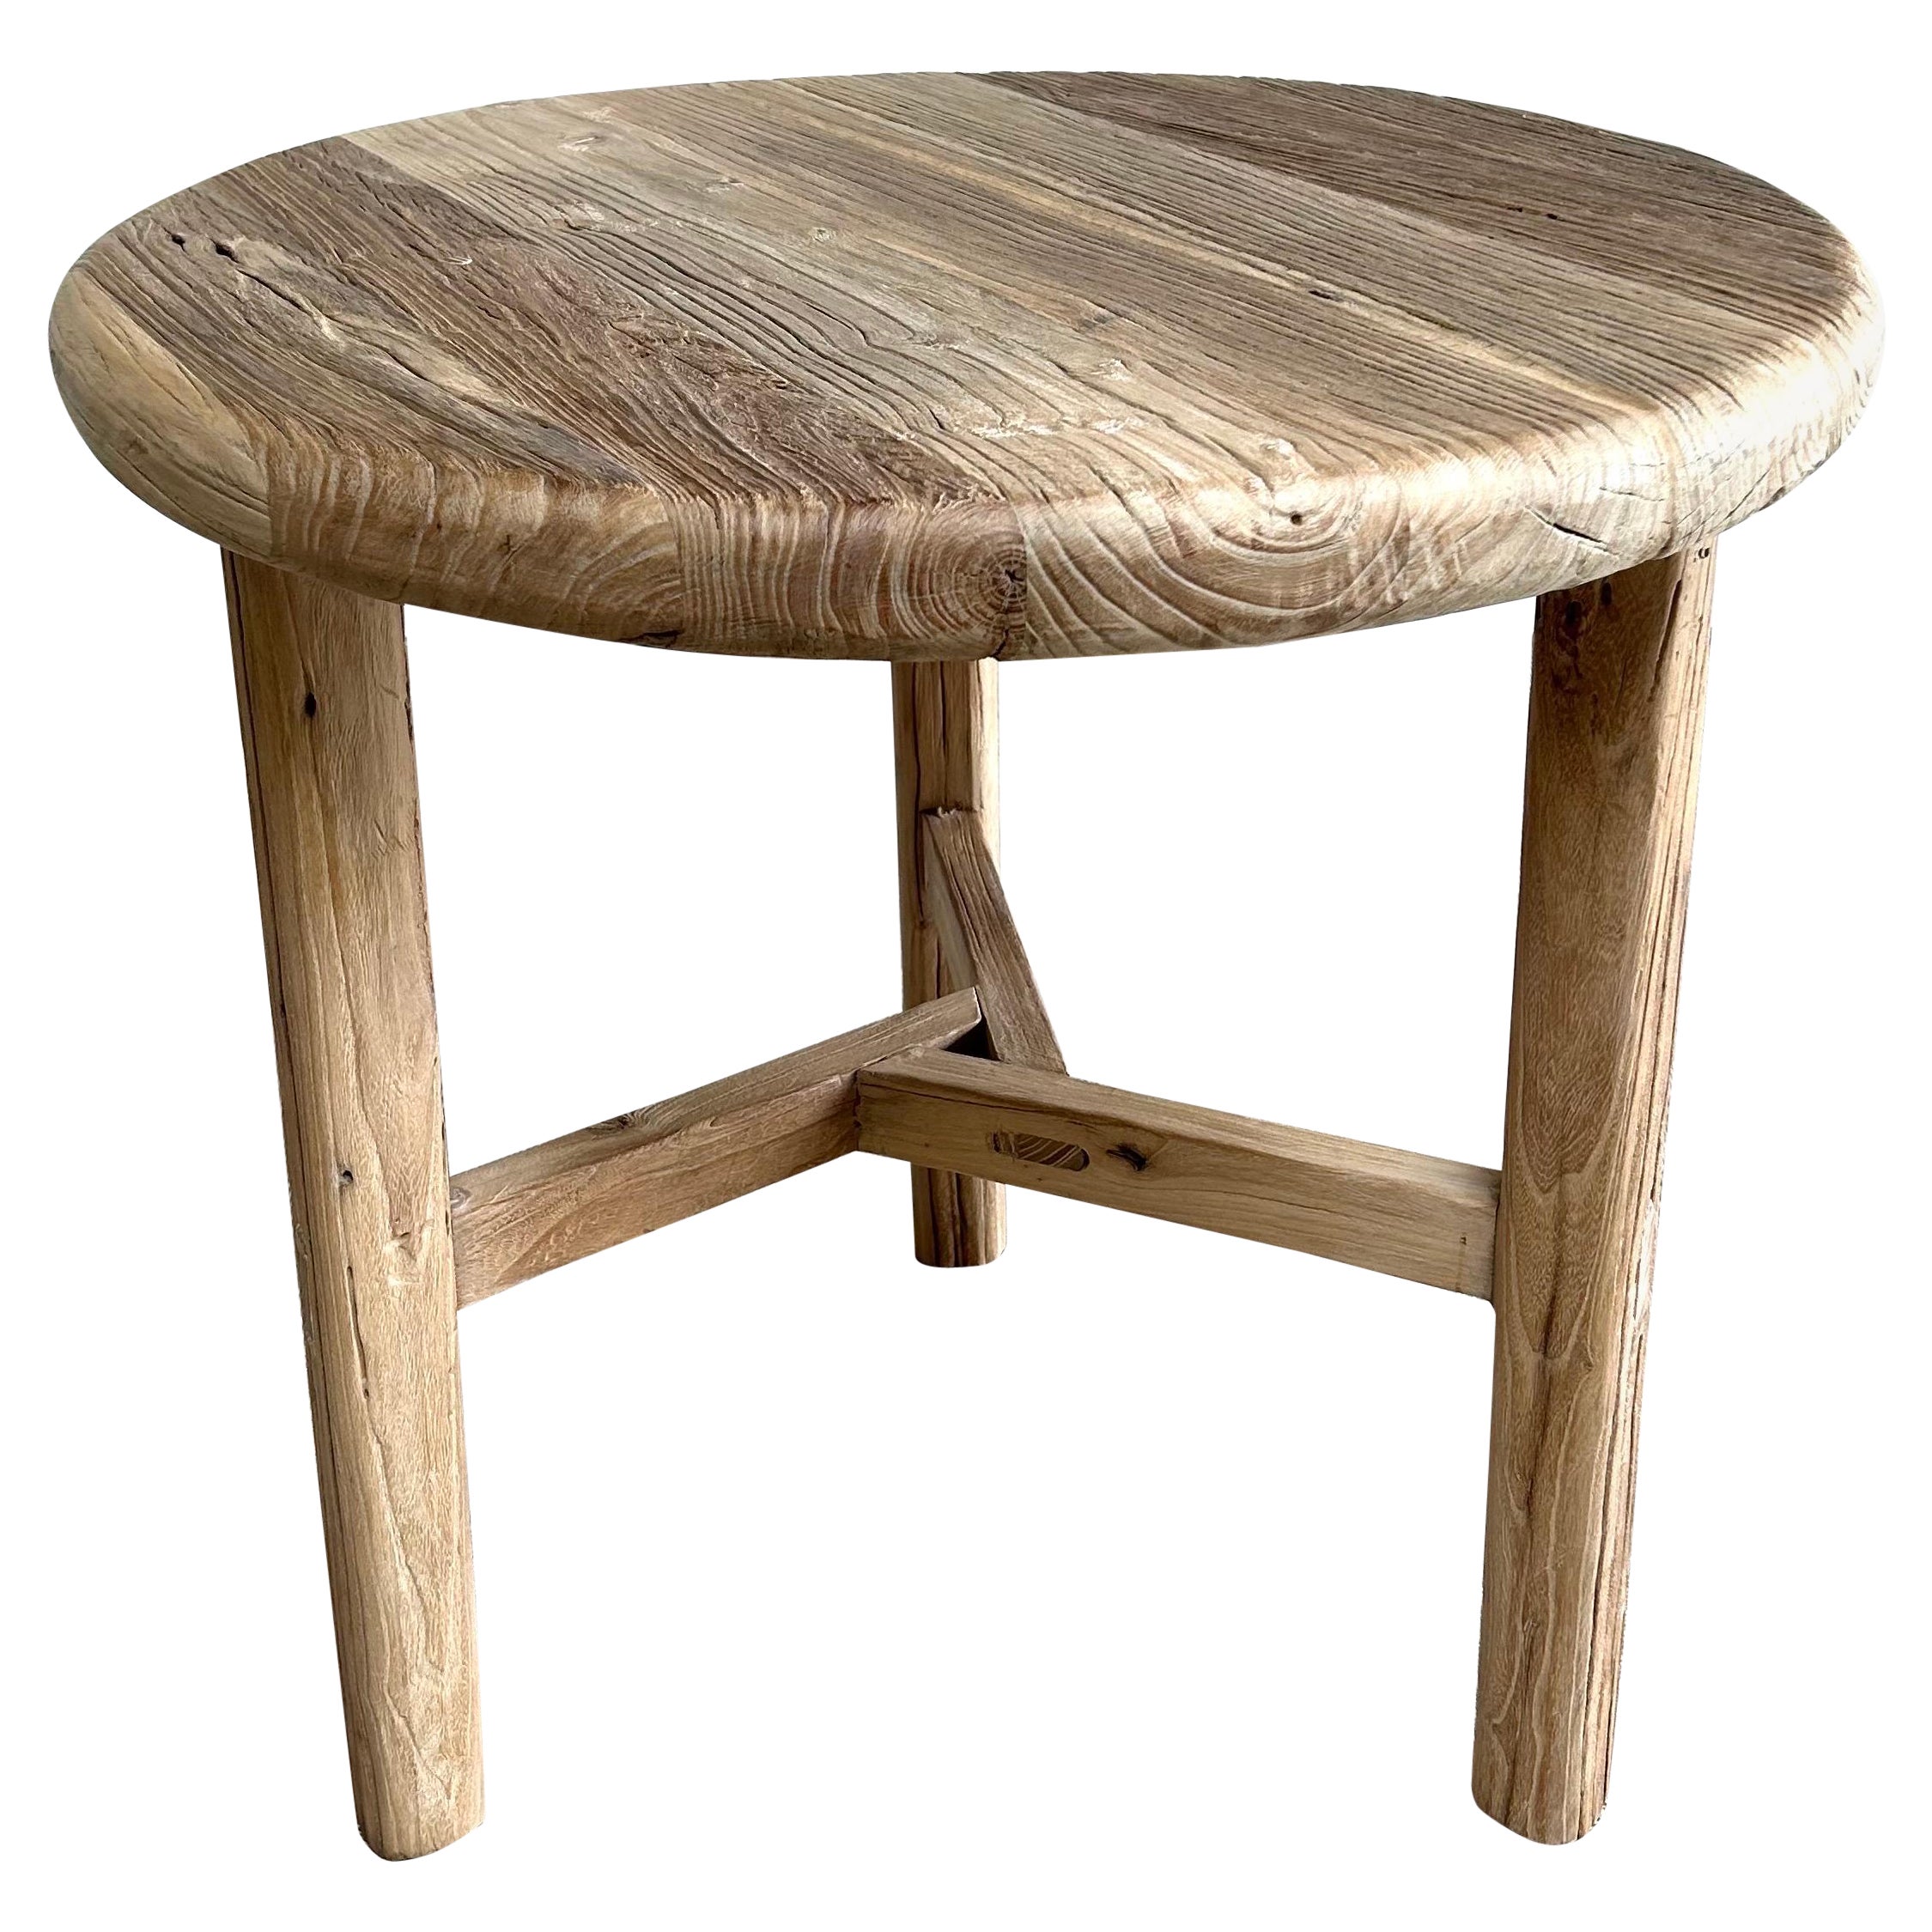 Reclaimed Elm Wood Side Table in Natural Finish